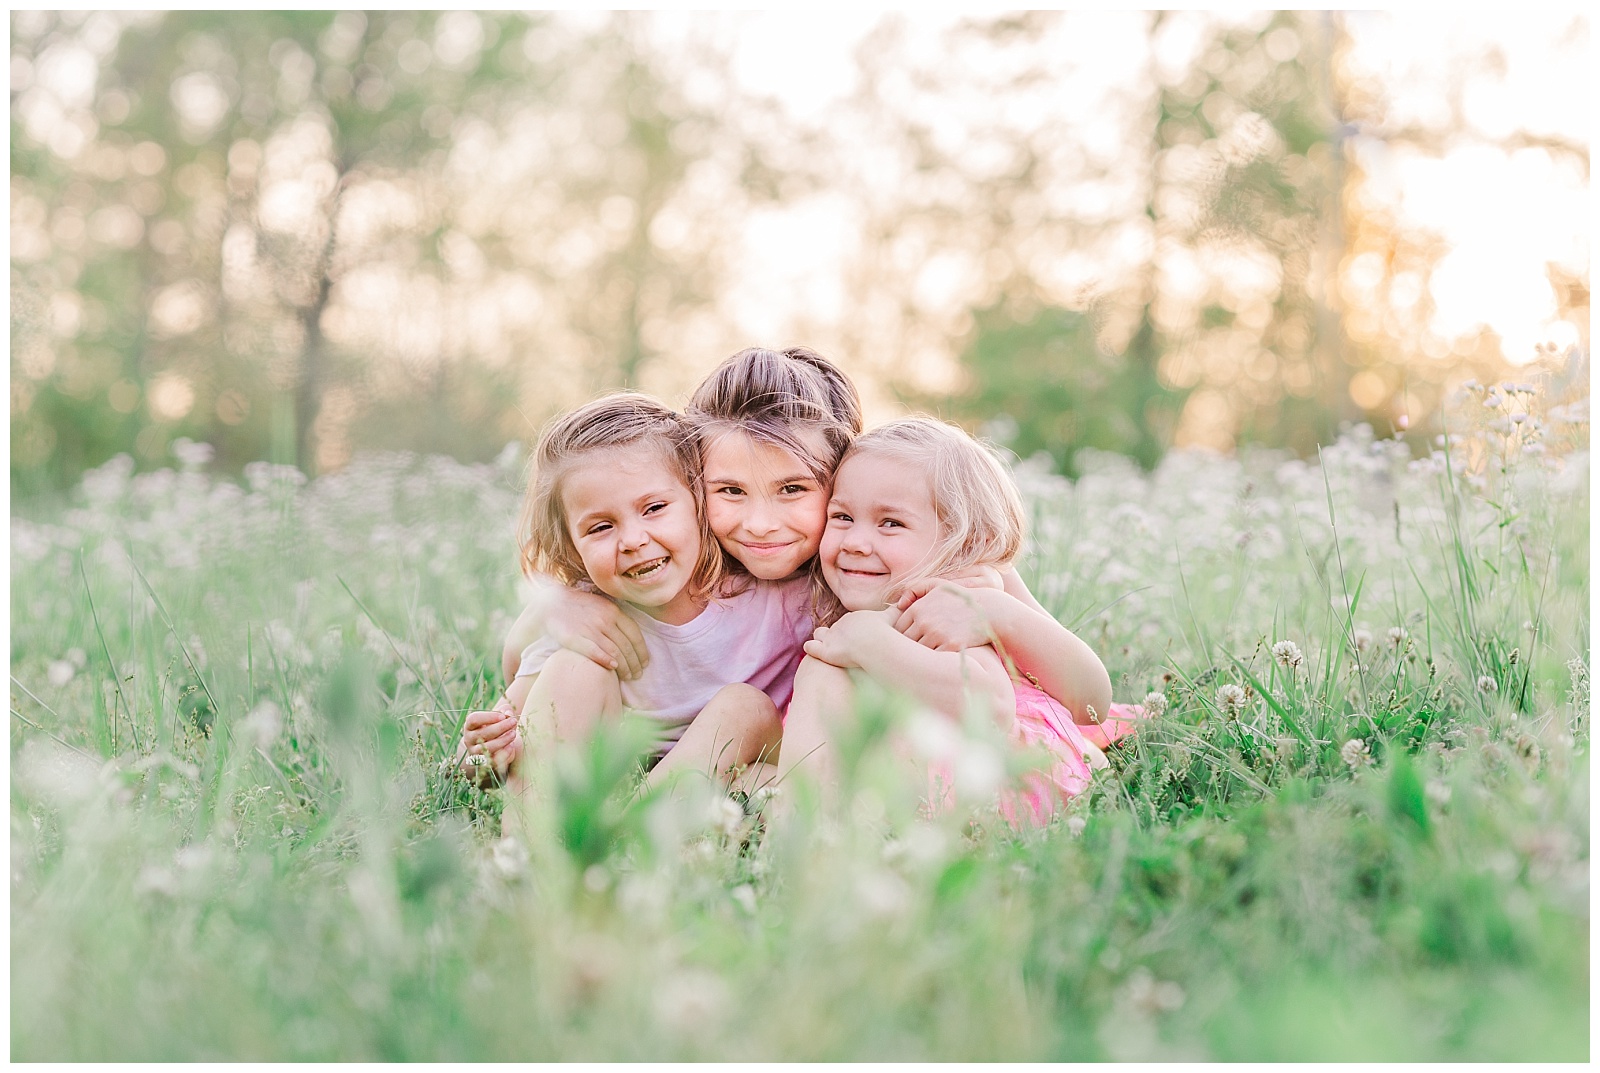 what time of day to book your family portraits shared by Rebekah Taylor Photography, TN family photographer